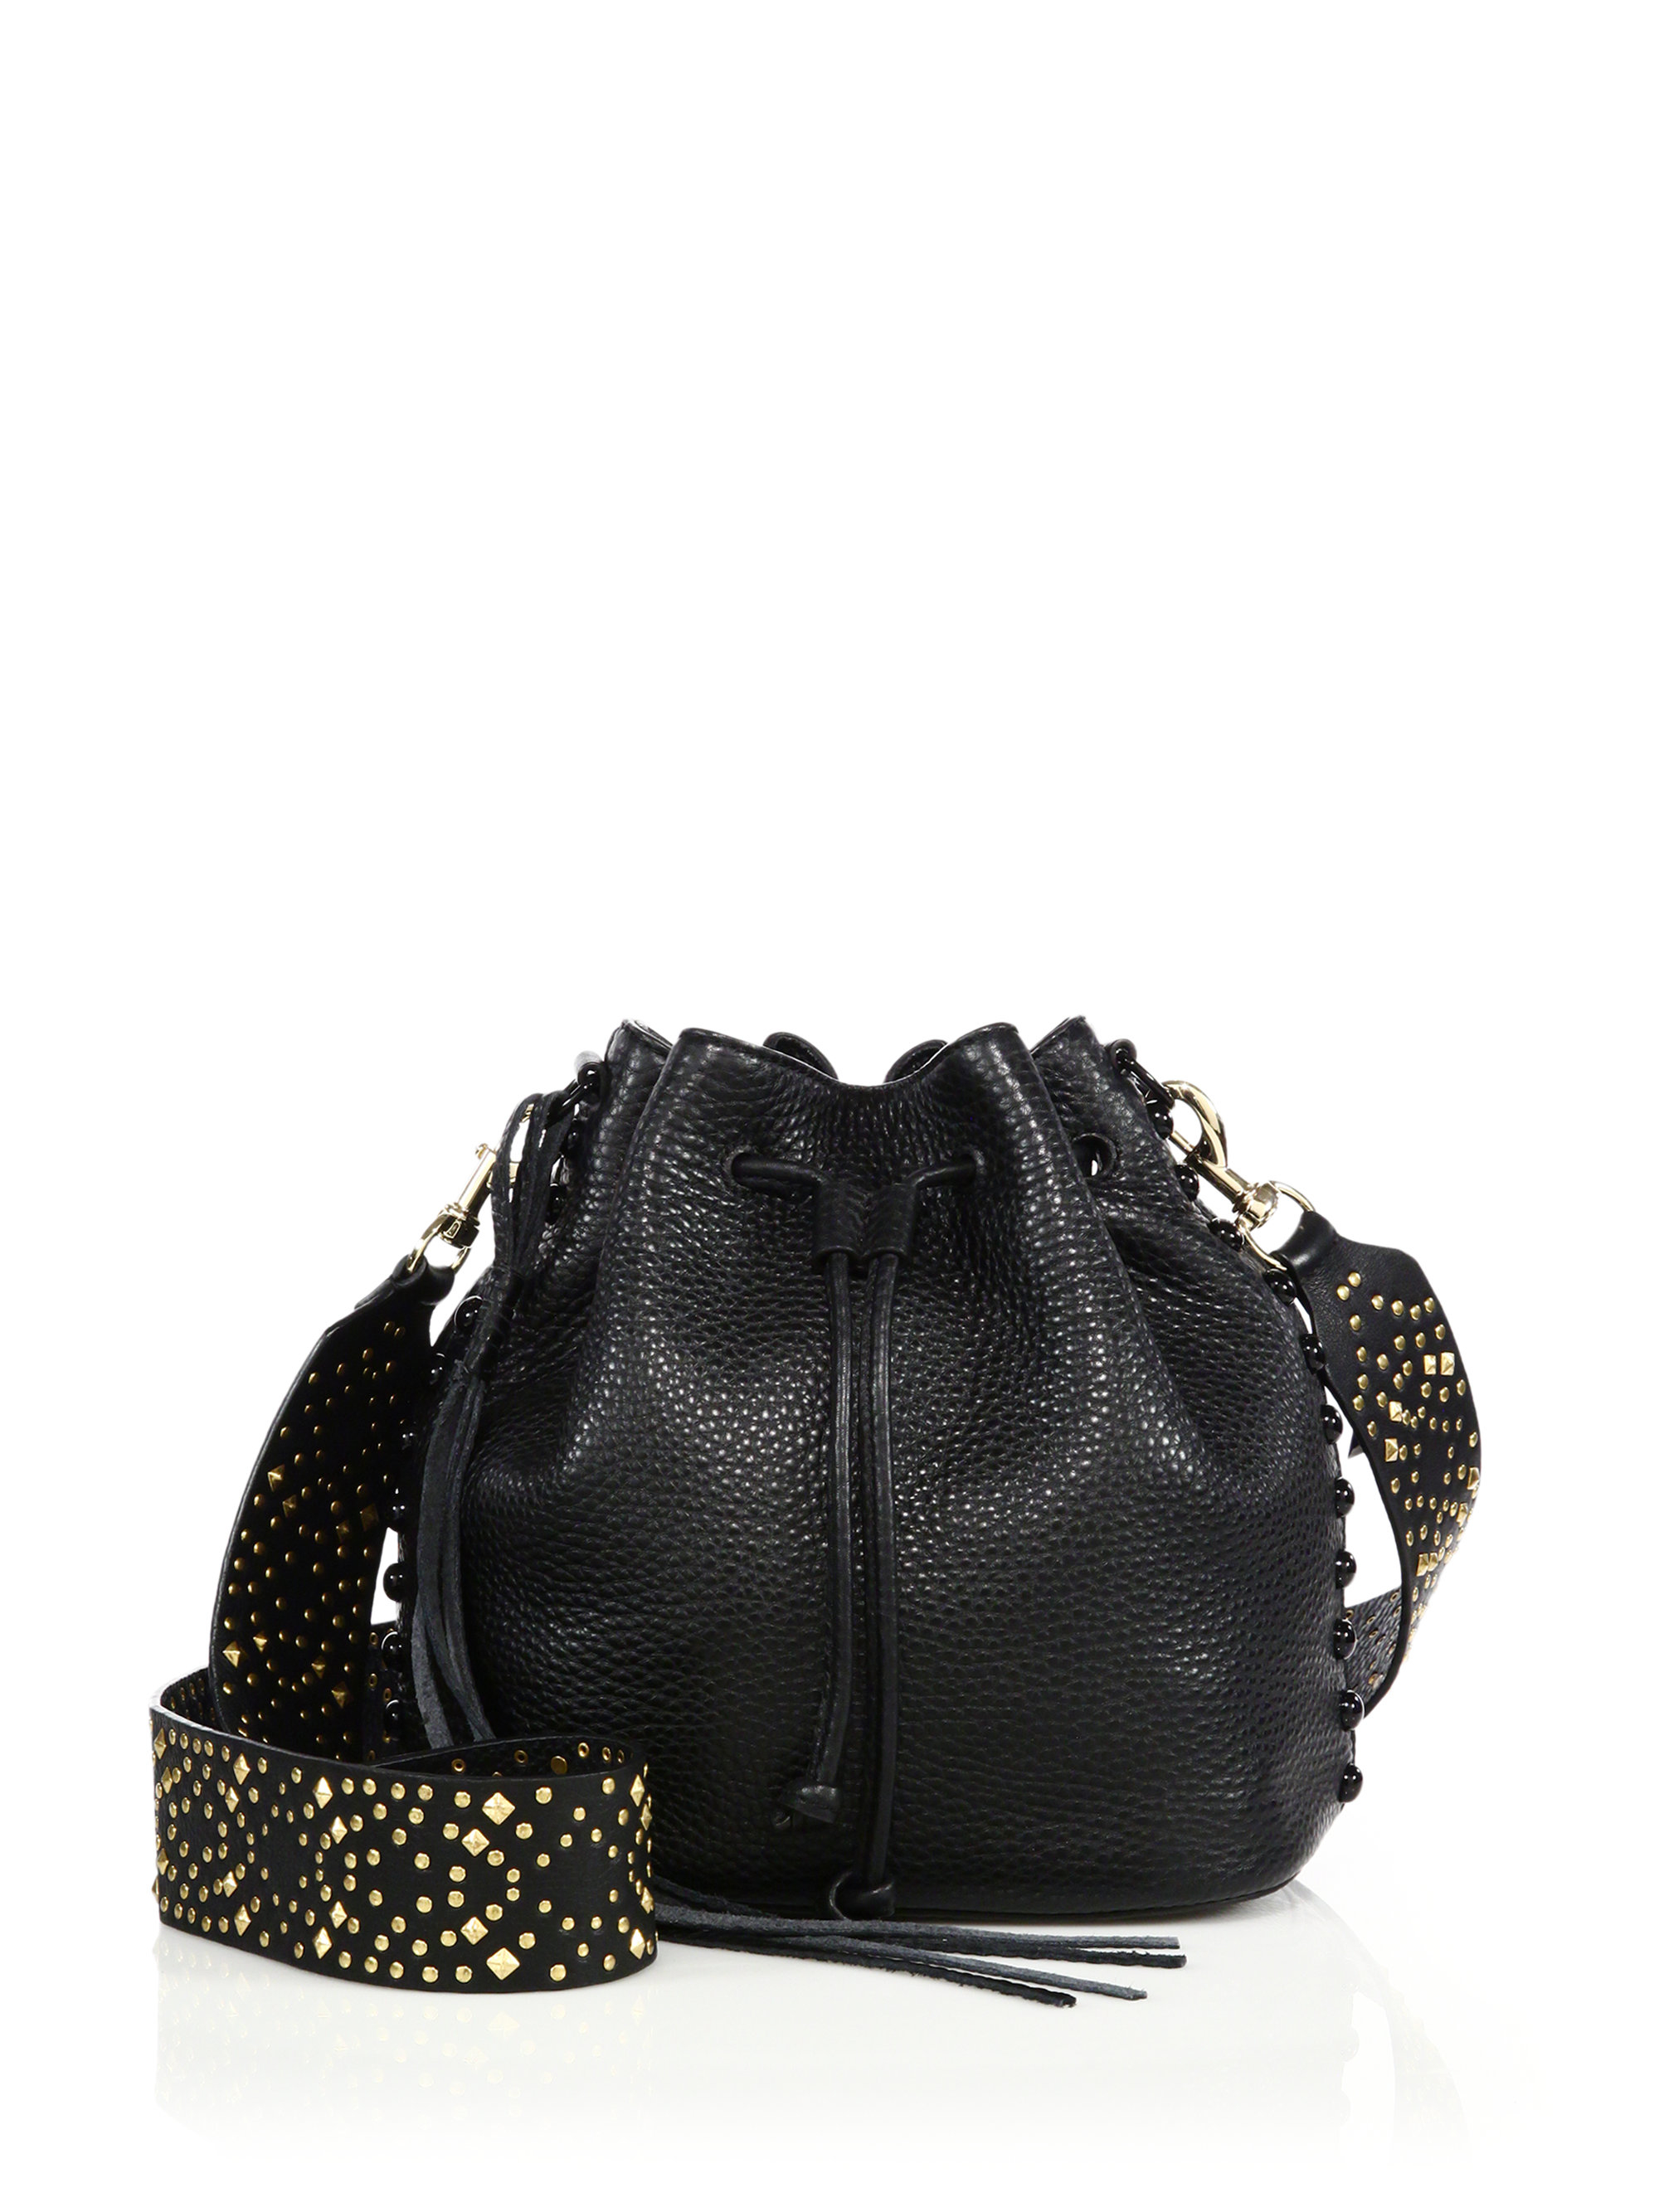 Lyst - Rebecca Minkoff Studded Guitar-strap Pebbled Leather Bucket Bag in Black